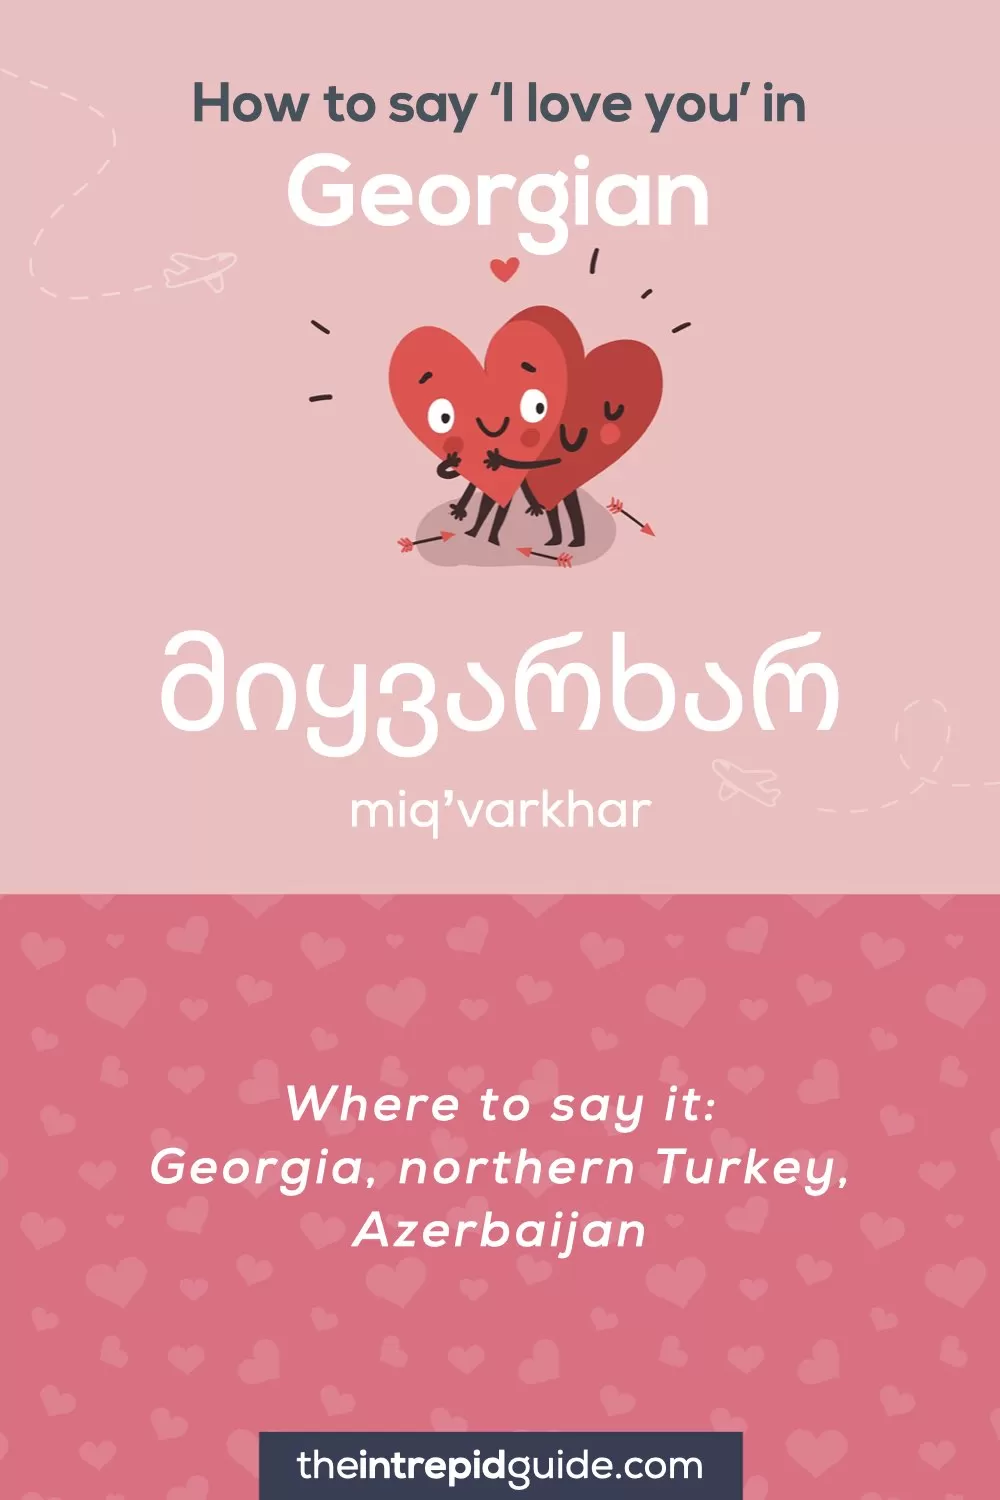 How to say I love you in different languages - Georgian - მიყვარხარ